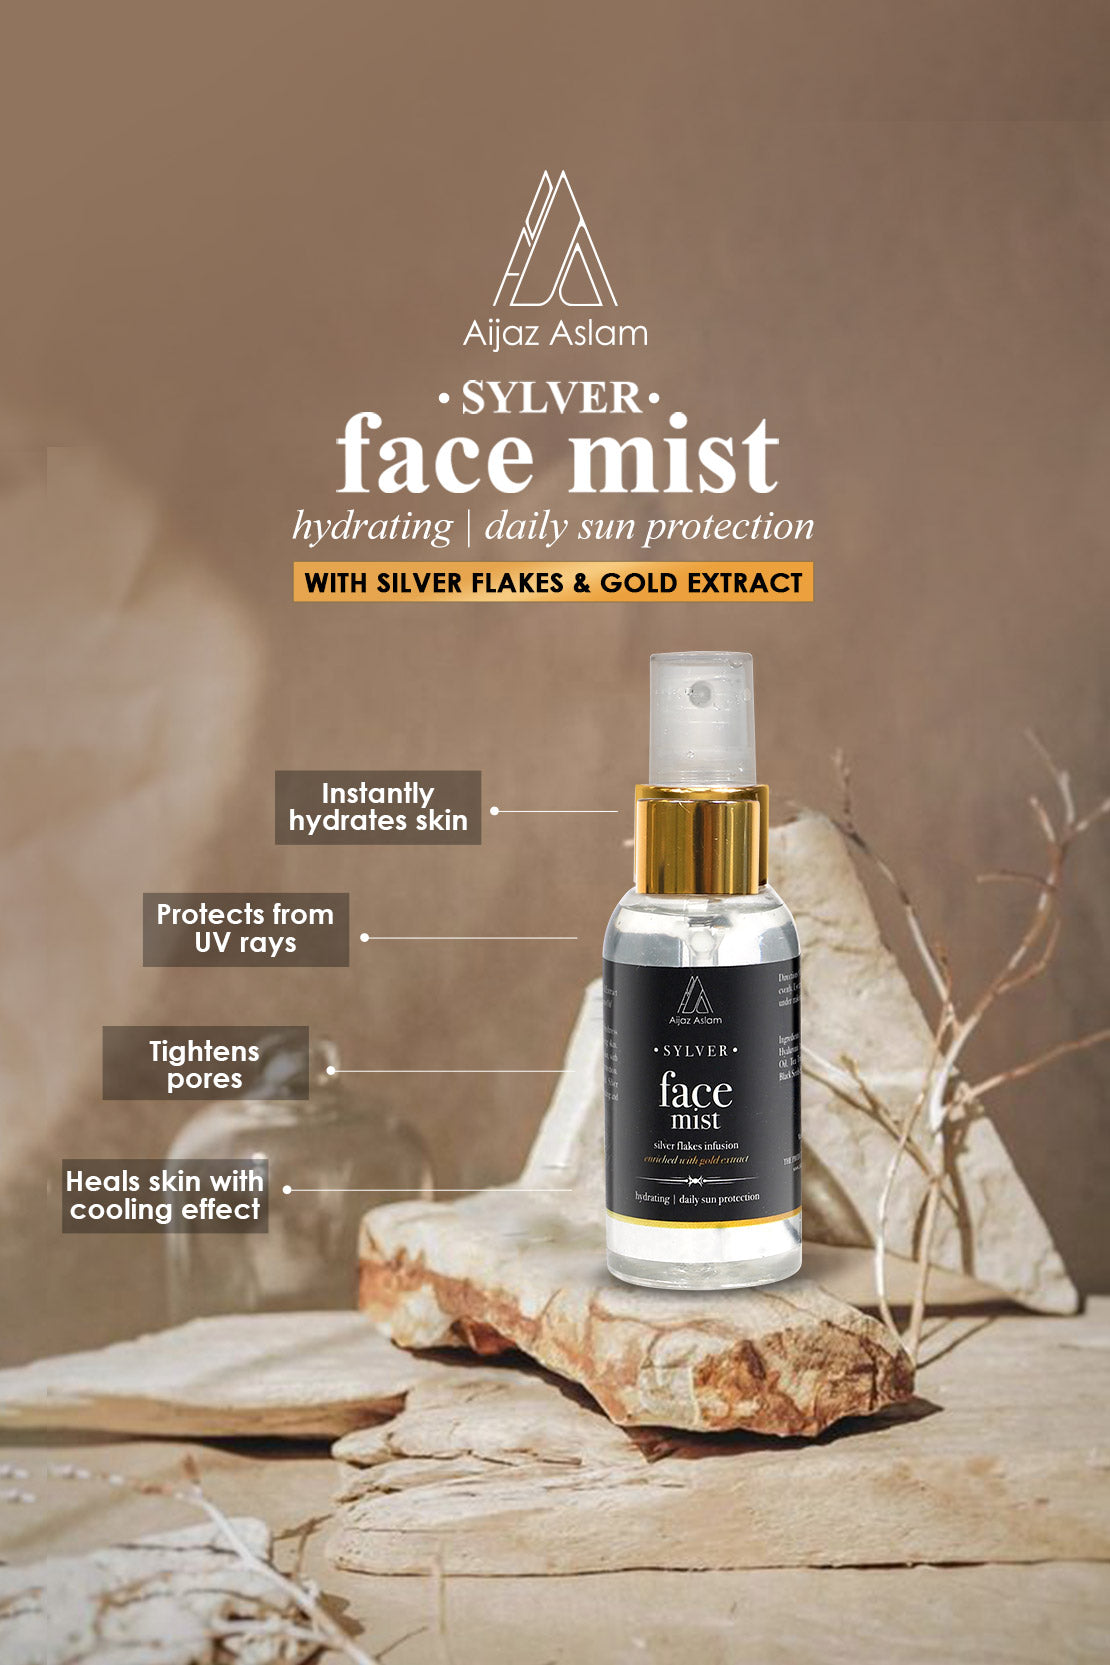 AA - Sylver Face Mist Hydrating | Daily Sun Protection